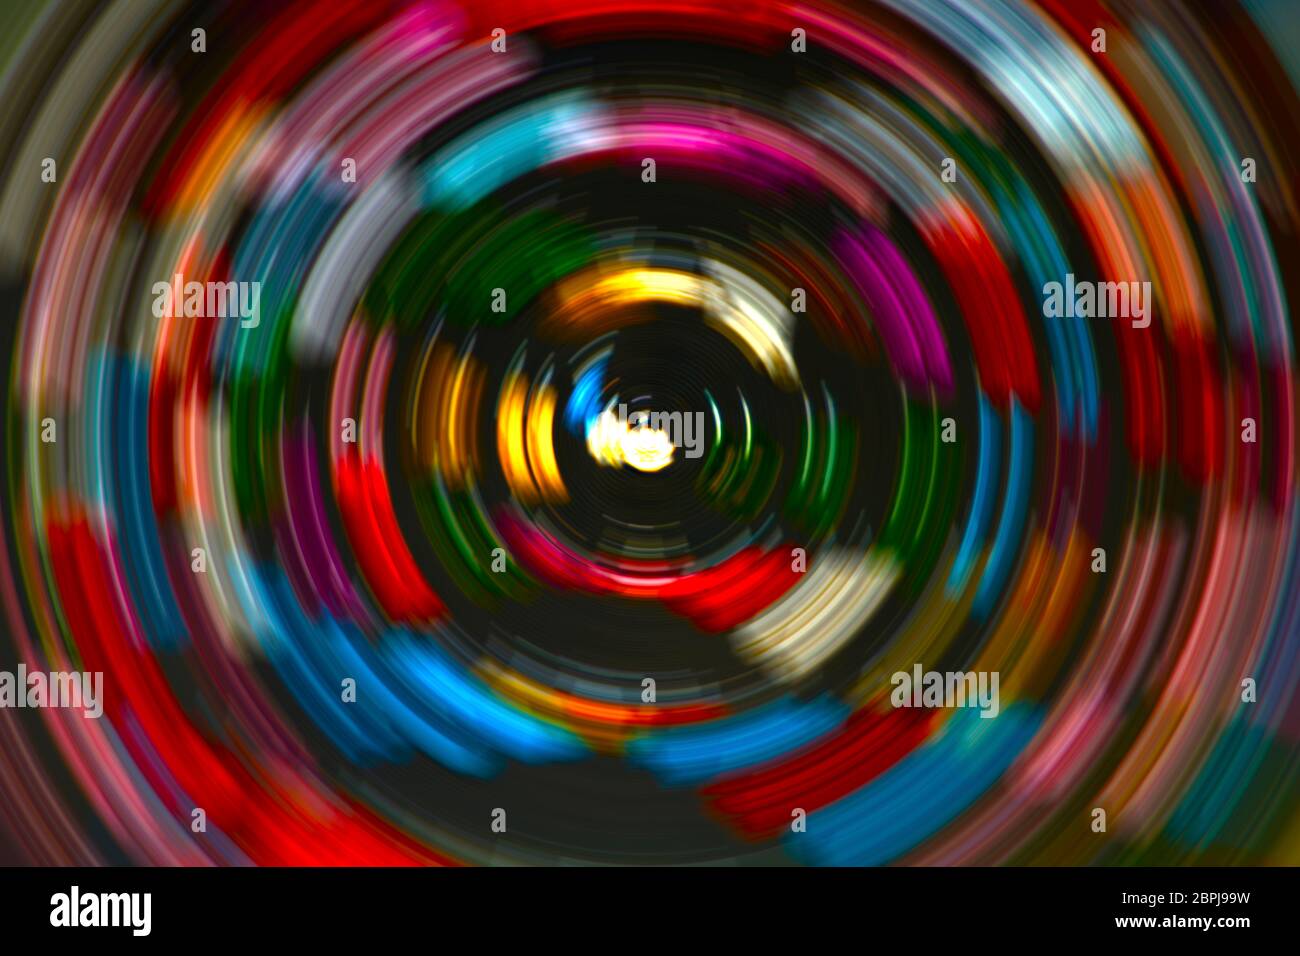 Radial motion blur background image with circles of alternating colors with focal point. Stock Photo